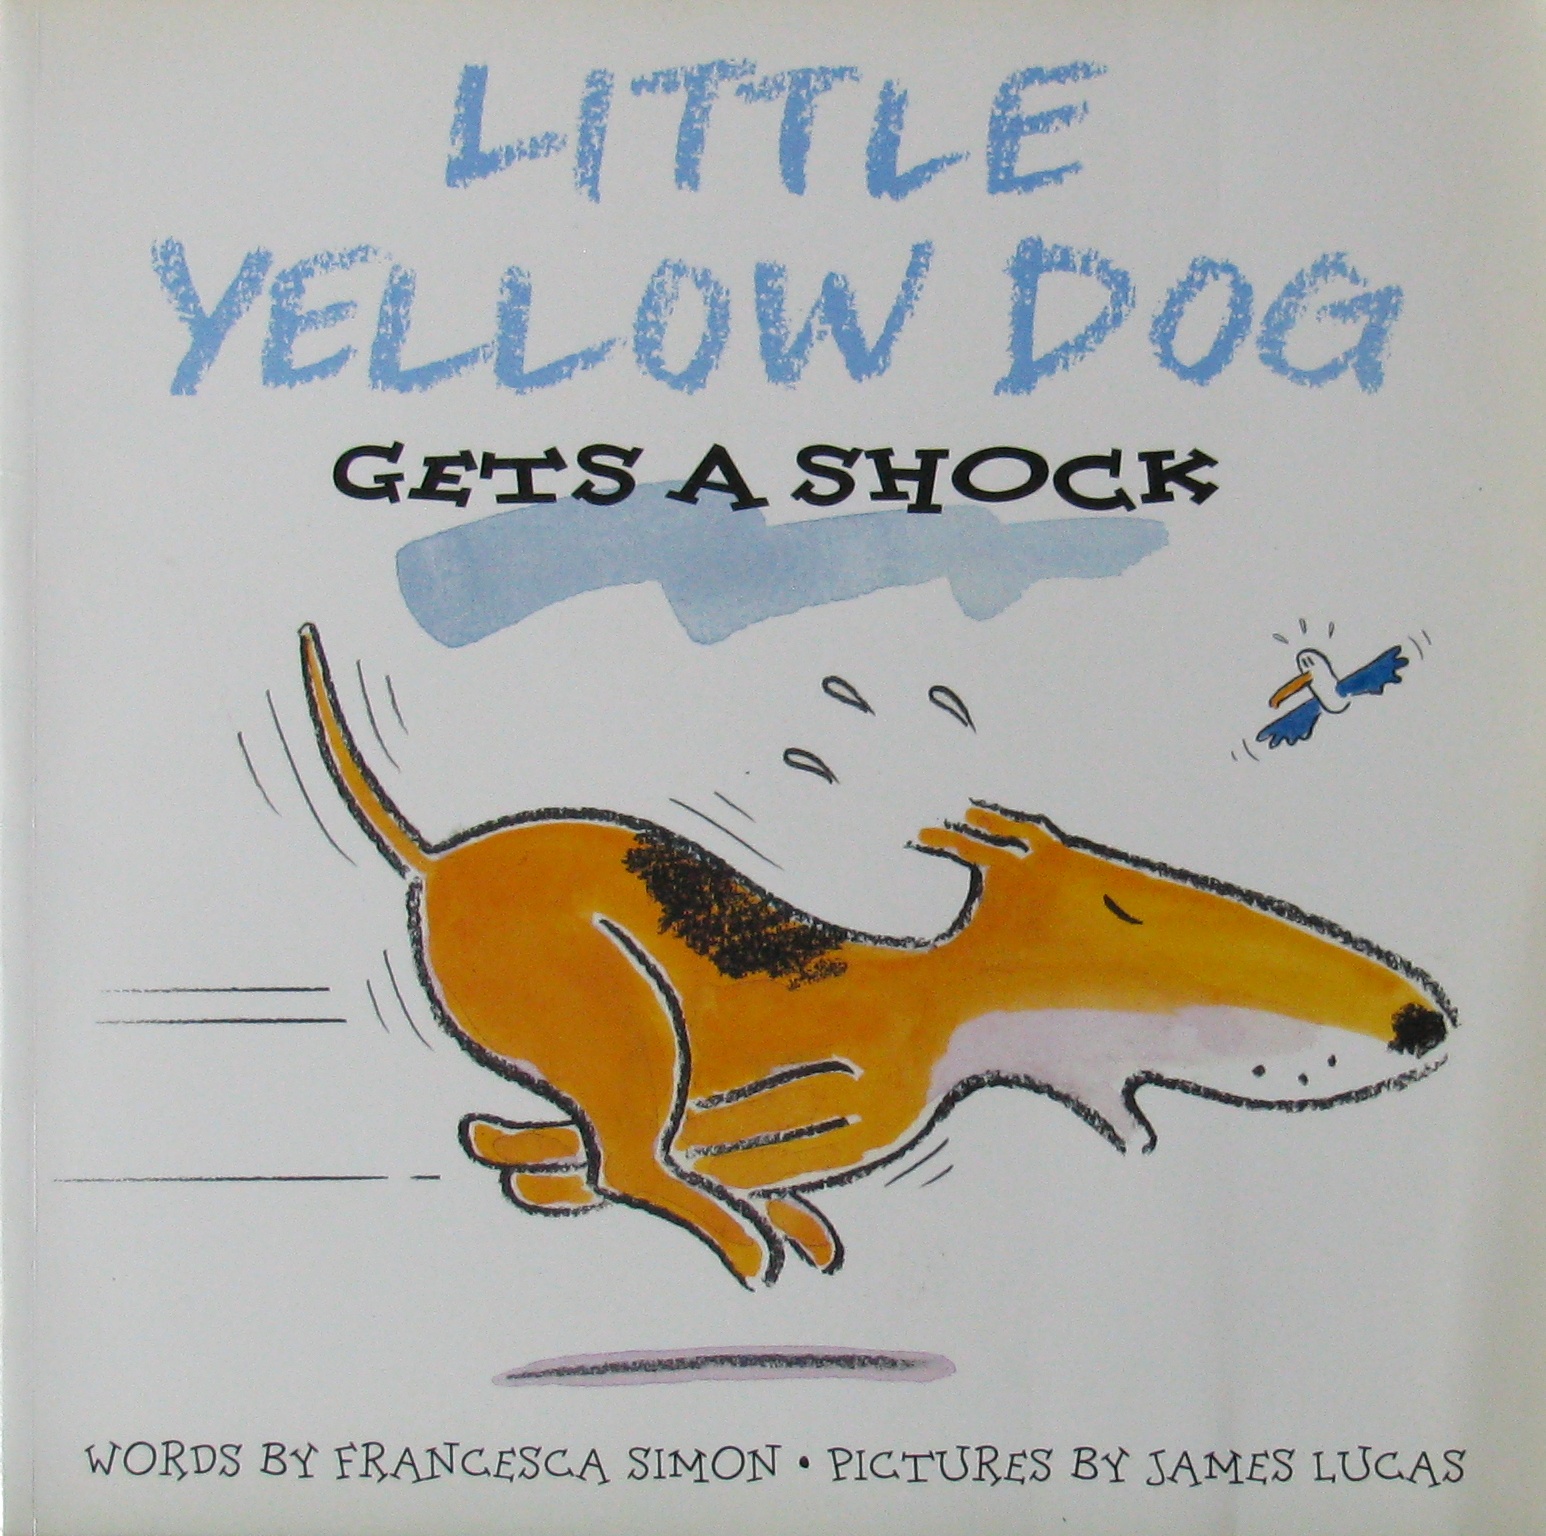 A Little Yellow Dog by Walter Mosley